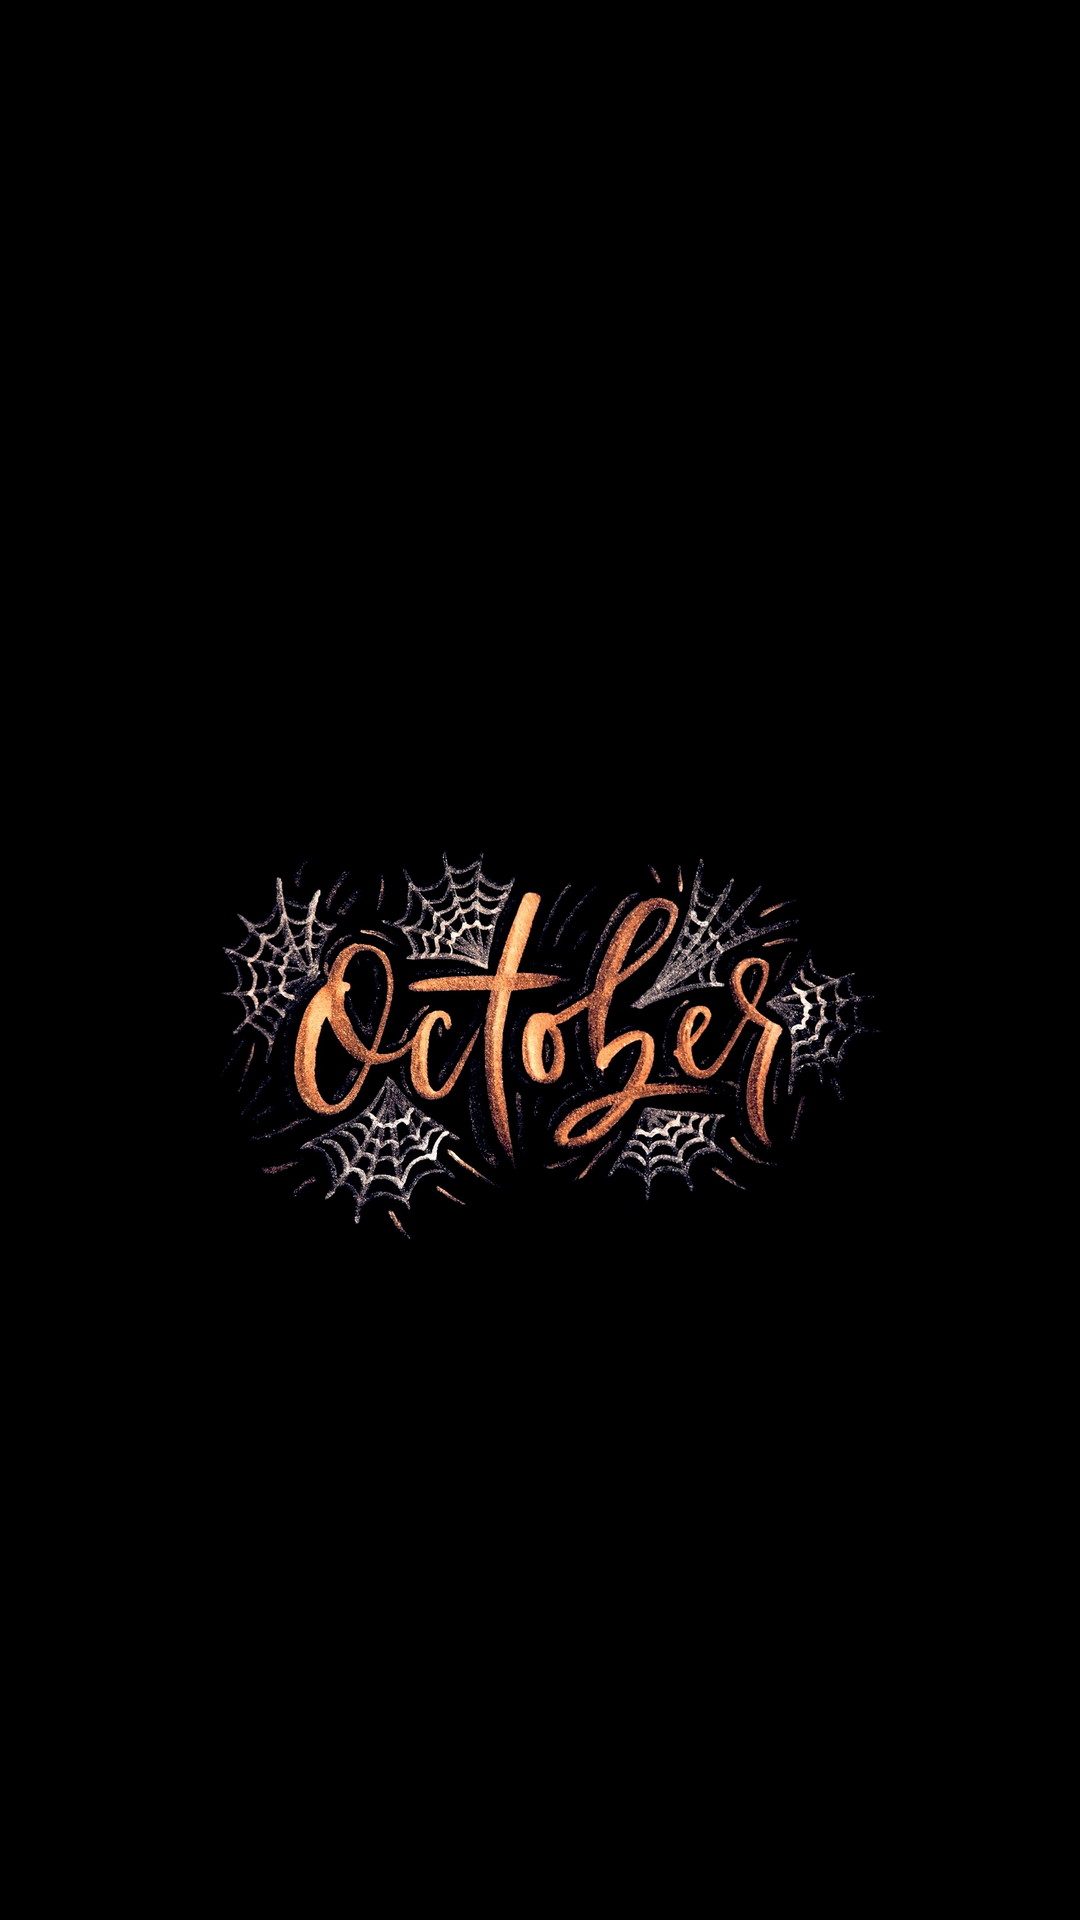 iPhone X Wallpaper October With high-resolution 1080X1920 pixel. You can use this wallpaper for your iPhone 5, 6, 7, 8, X, XS, XR backgrounds, Mobile Screensaver, or iPad Lock Screen